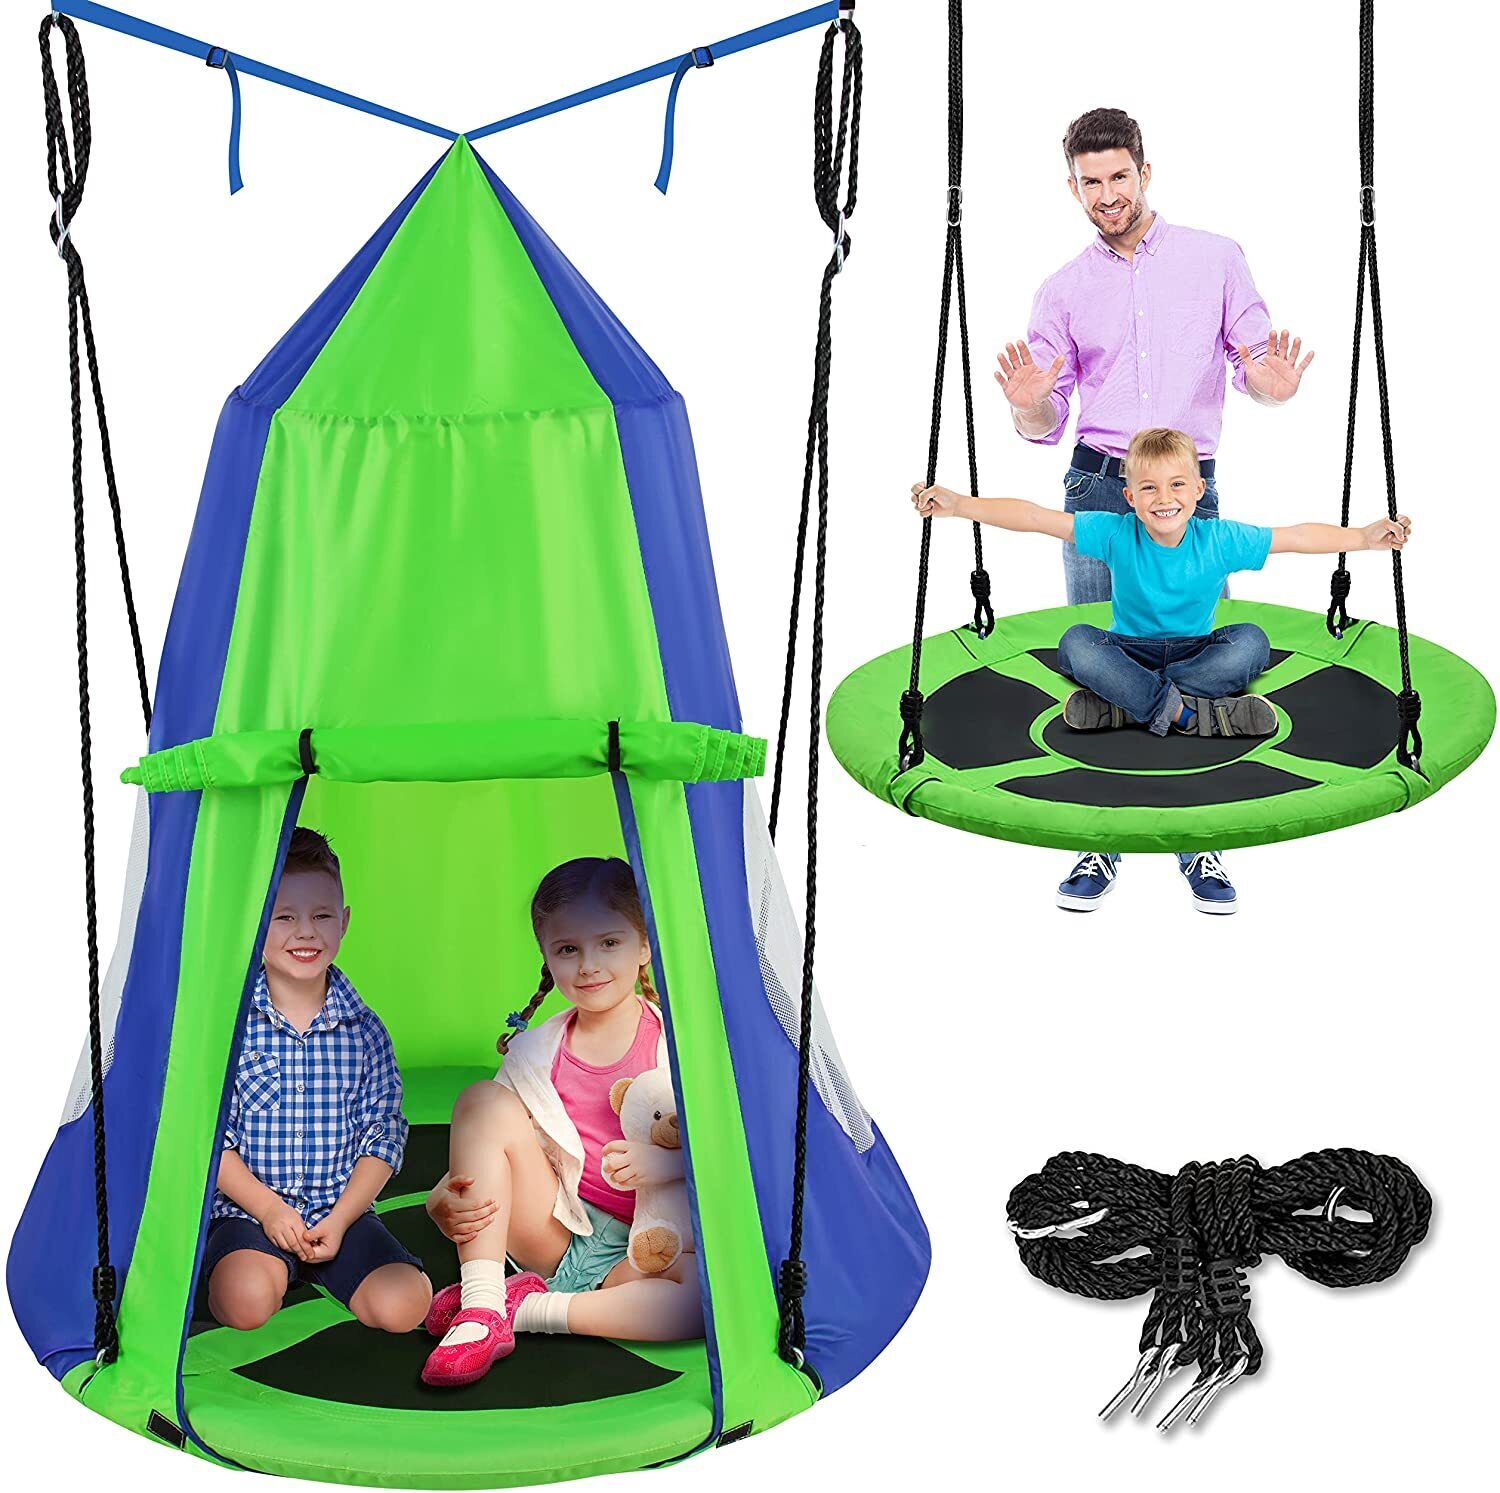 Hanging Playhouse For An Older Child